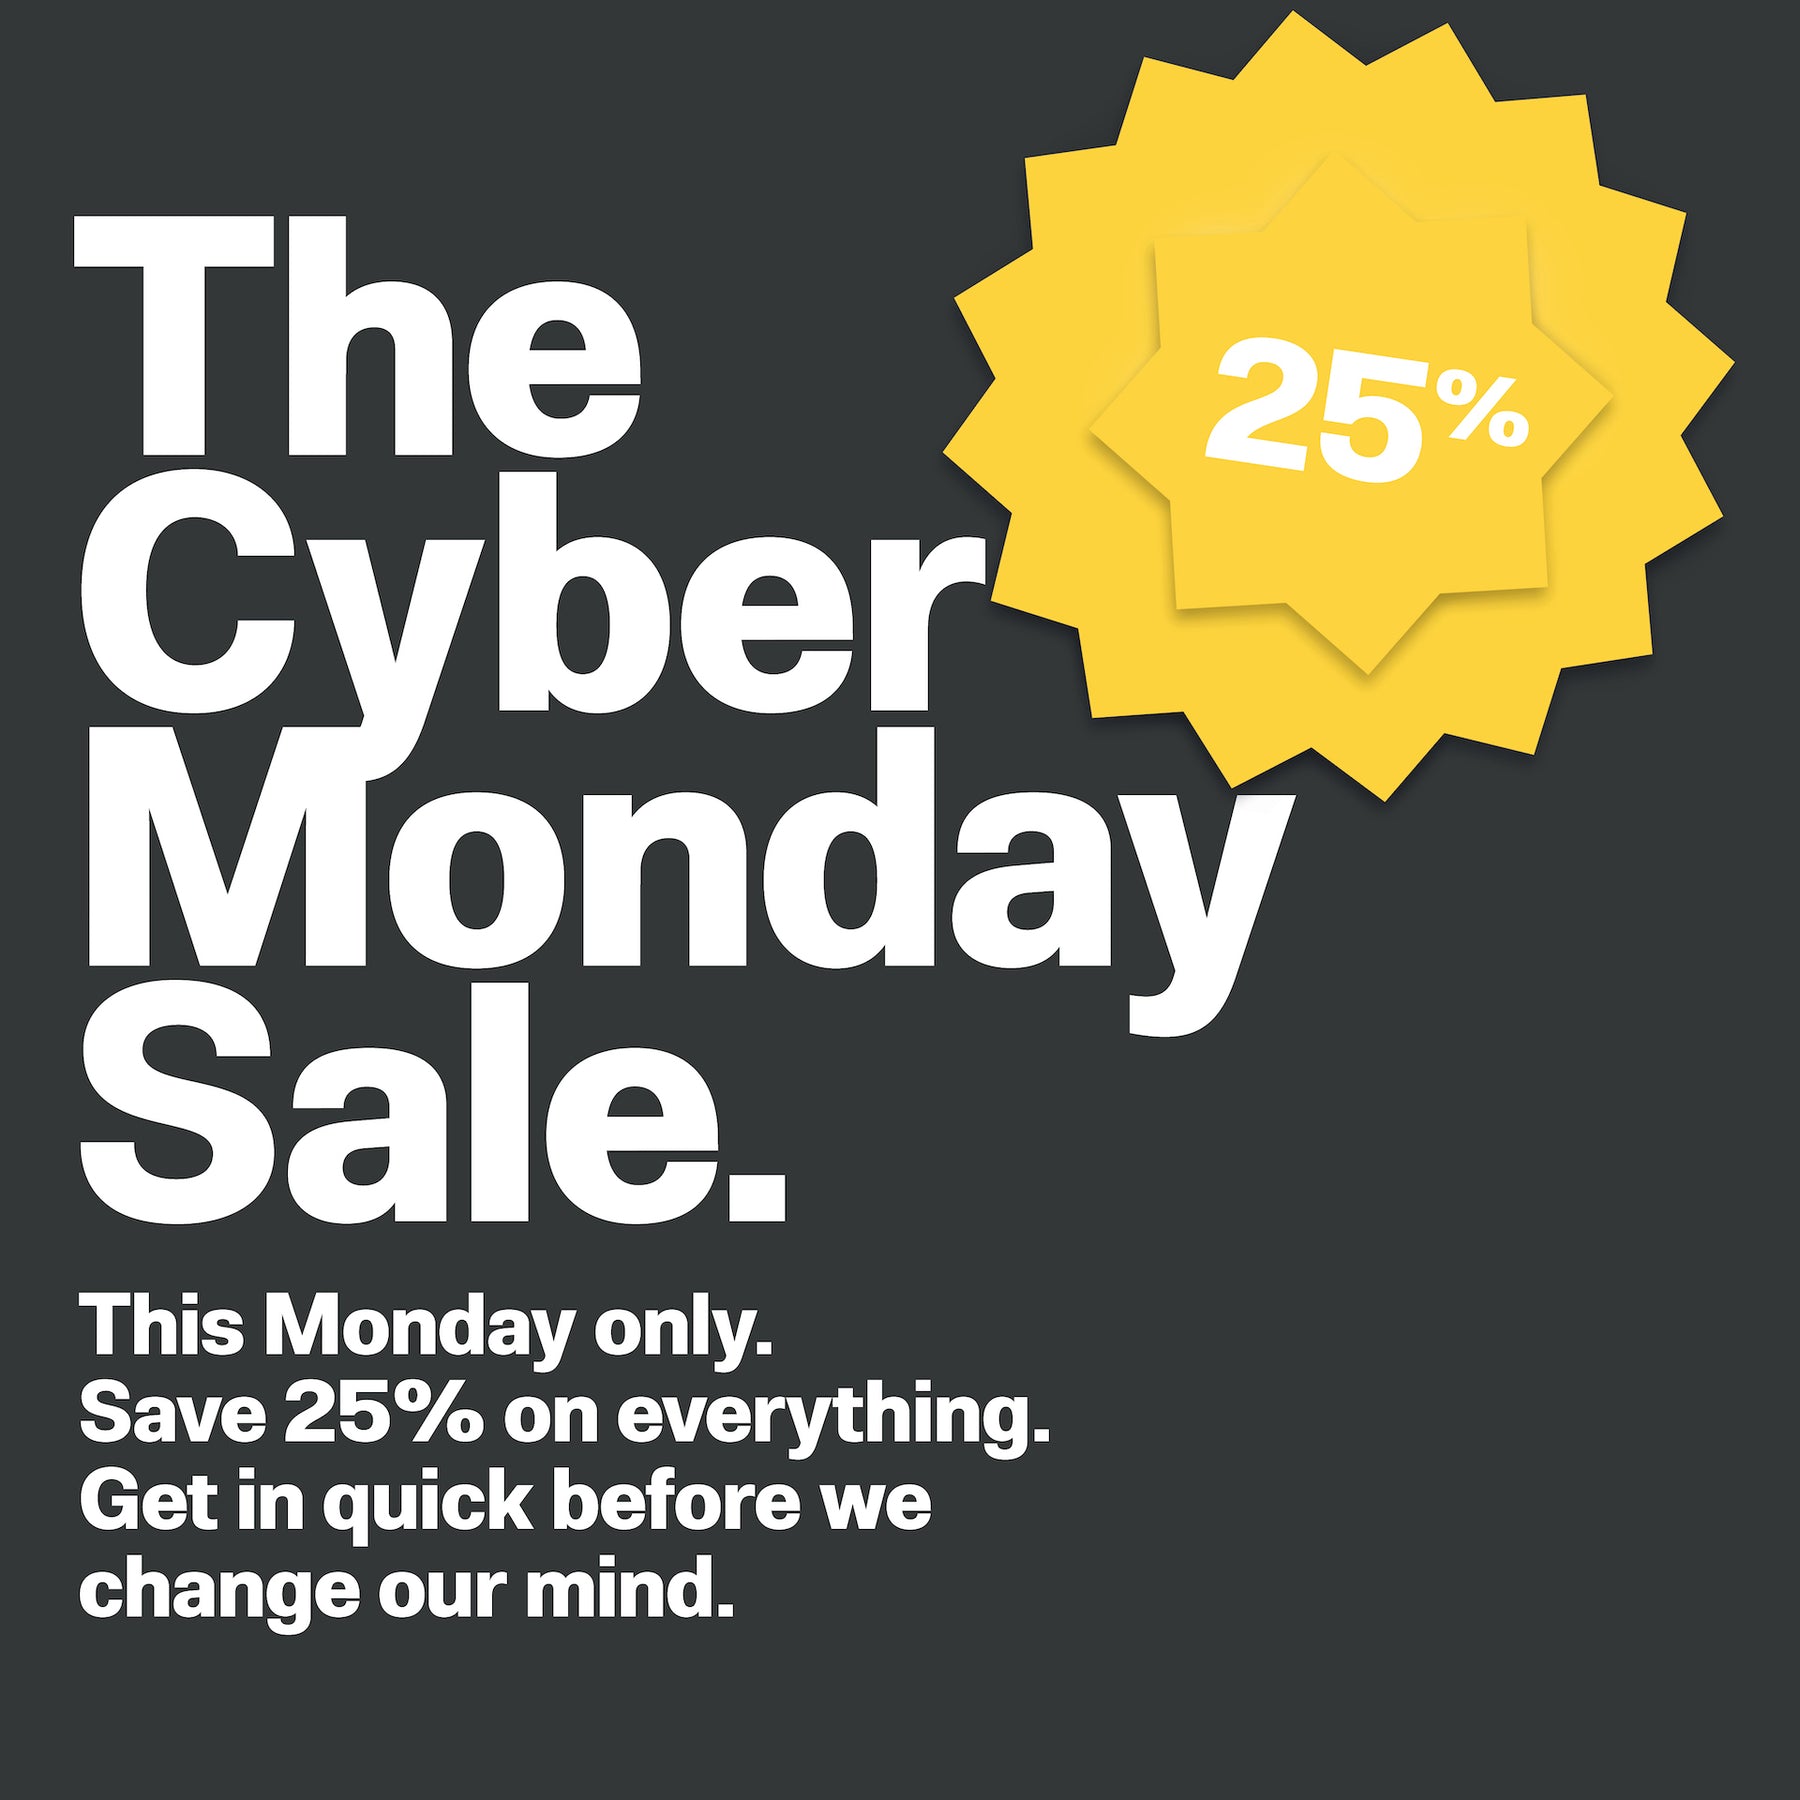 The Cyber Monday Sale.